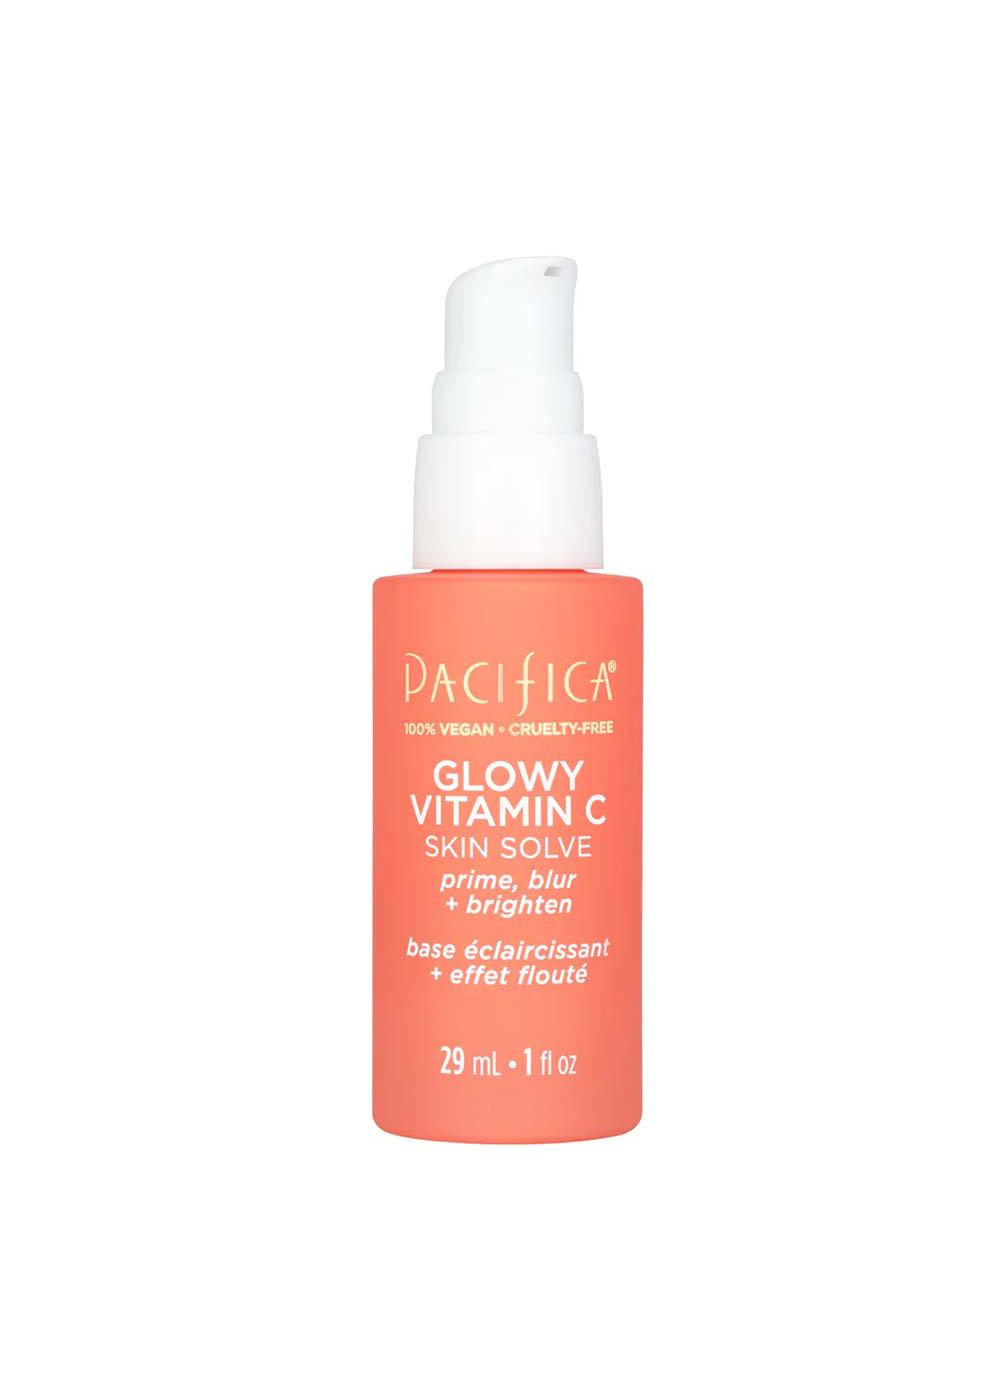 Pacifica Glowy Vitamin C Skin Solve; image 1 of 3